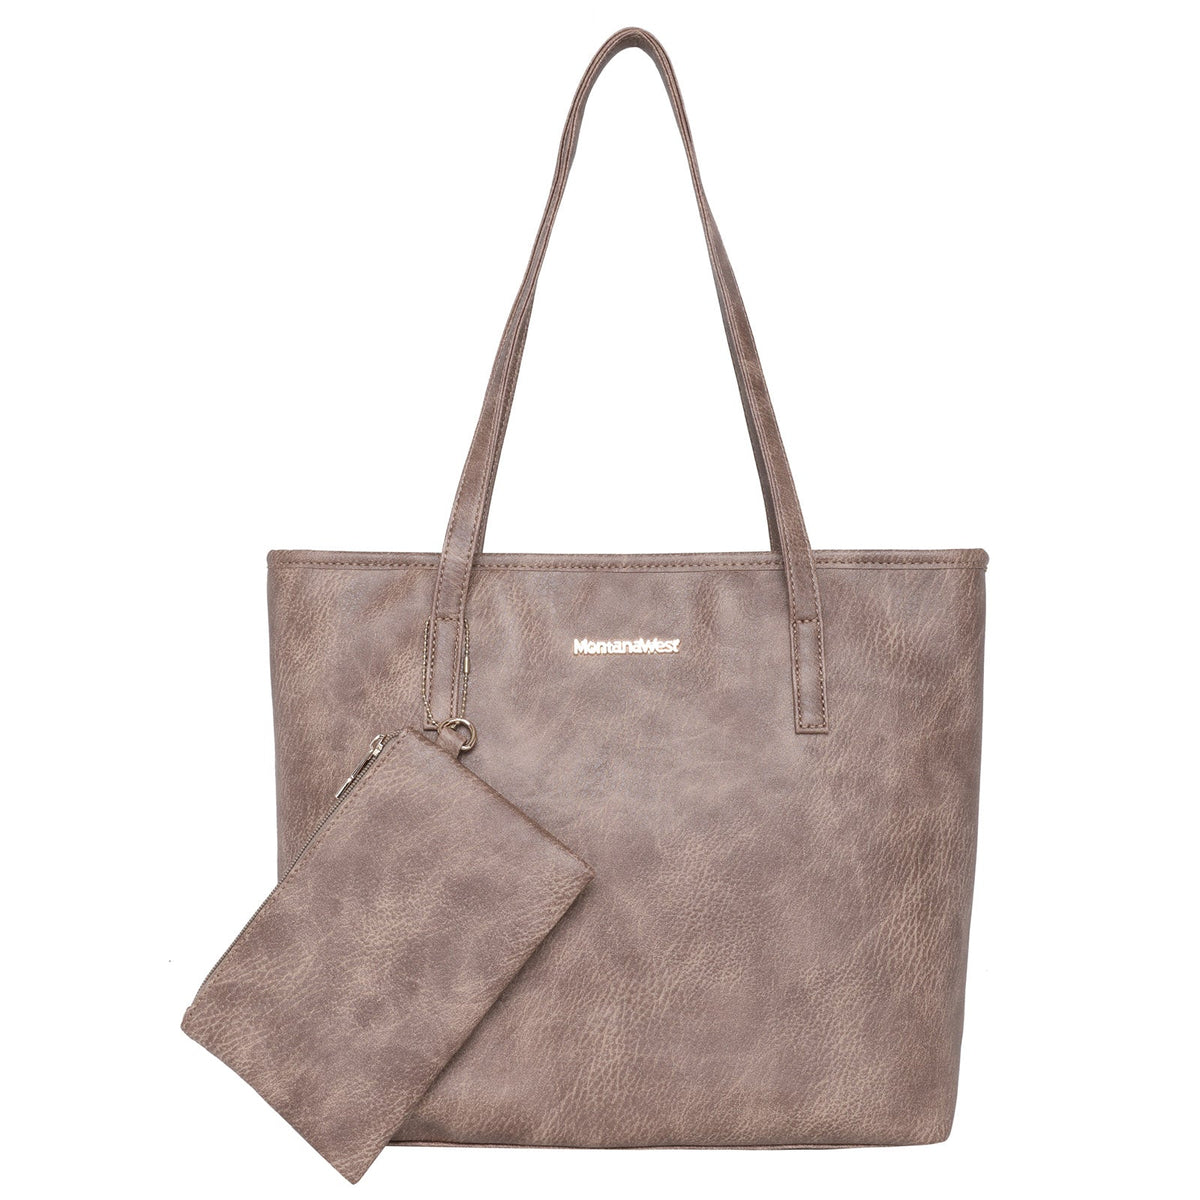 Montana West Carry-All Tote - Khaki - Cowgirl Wear